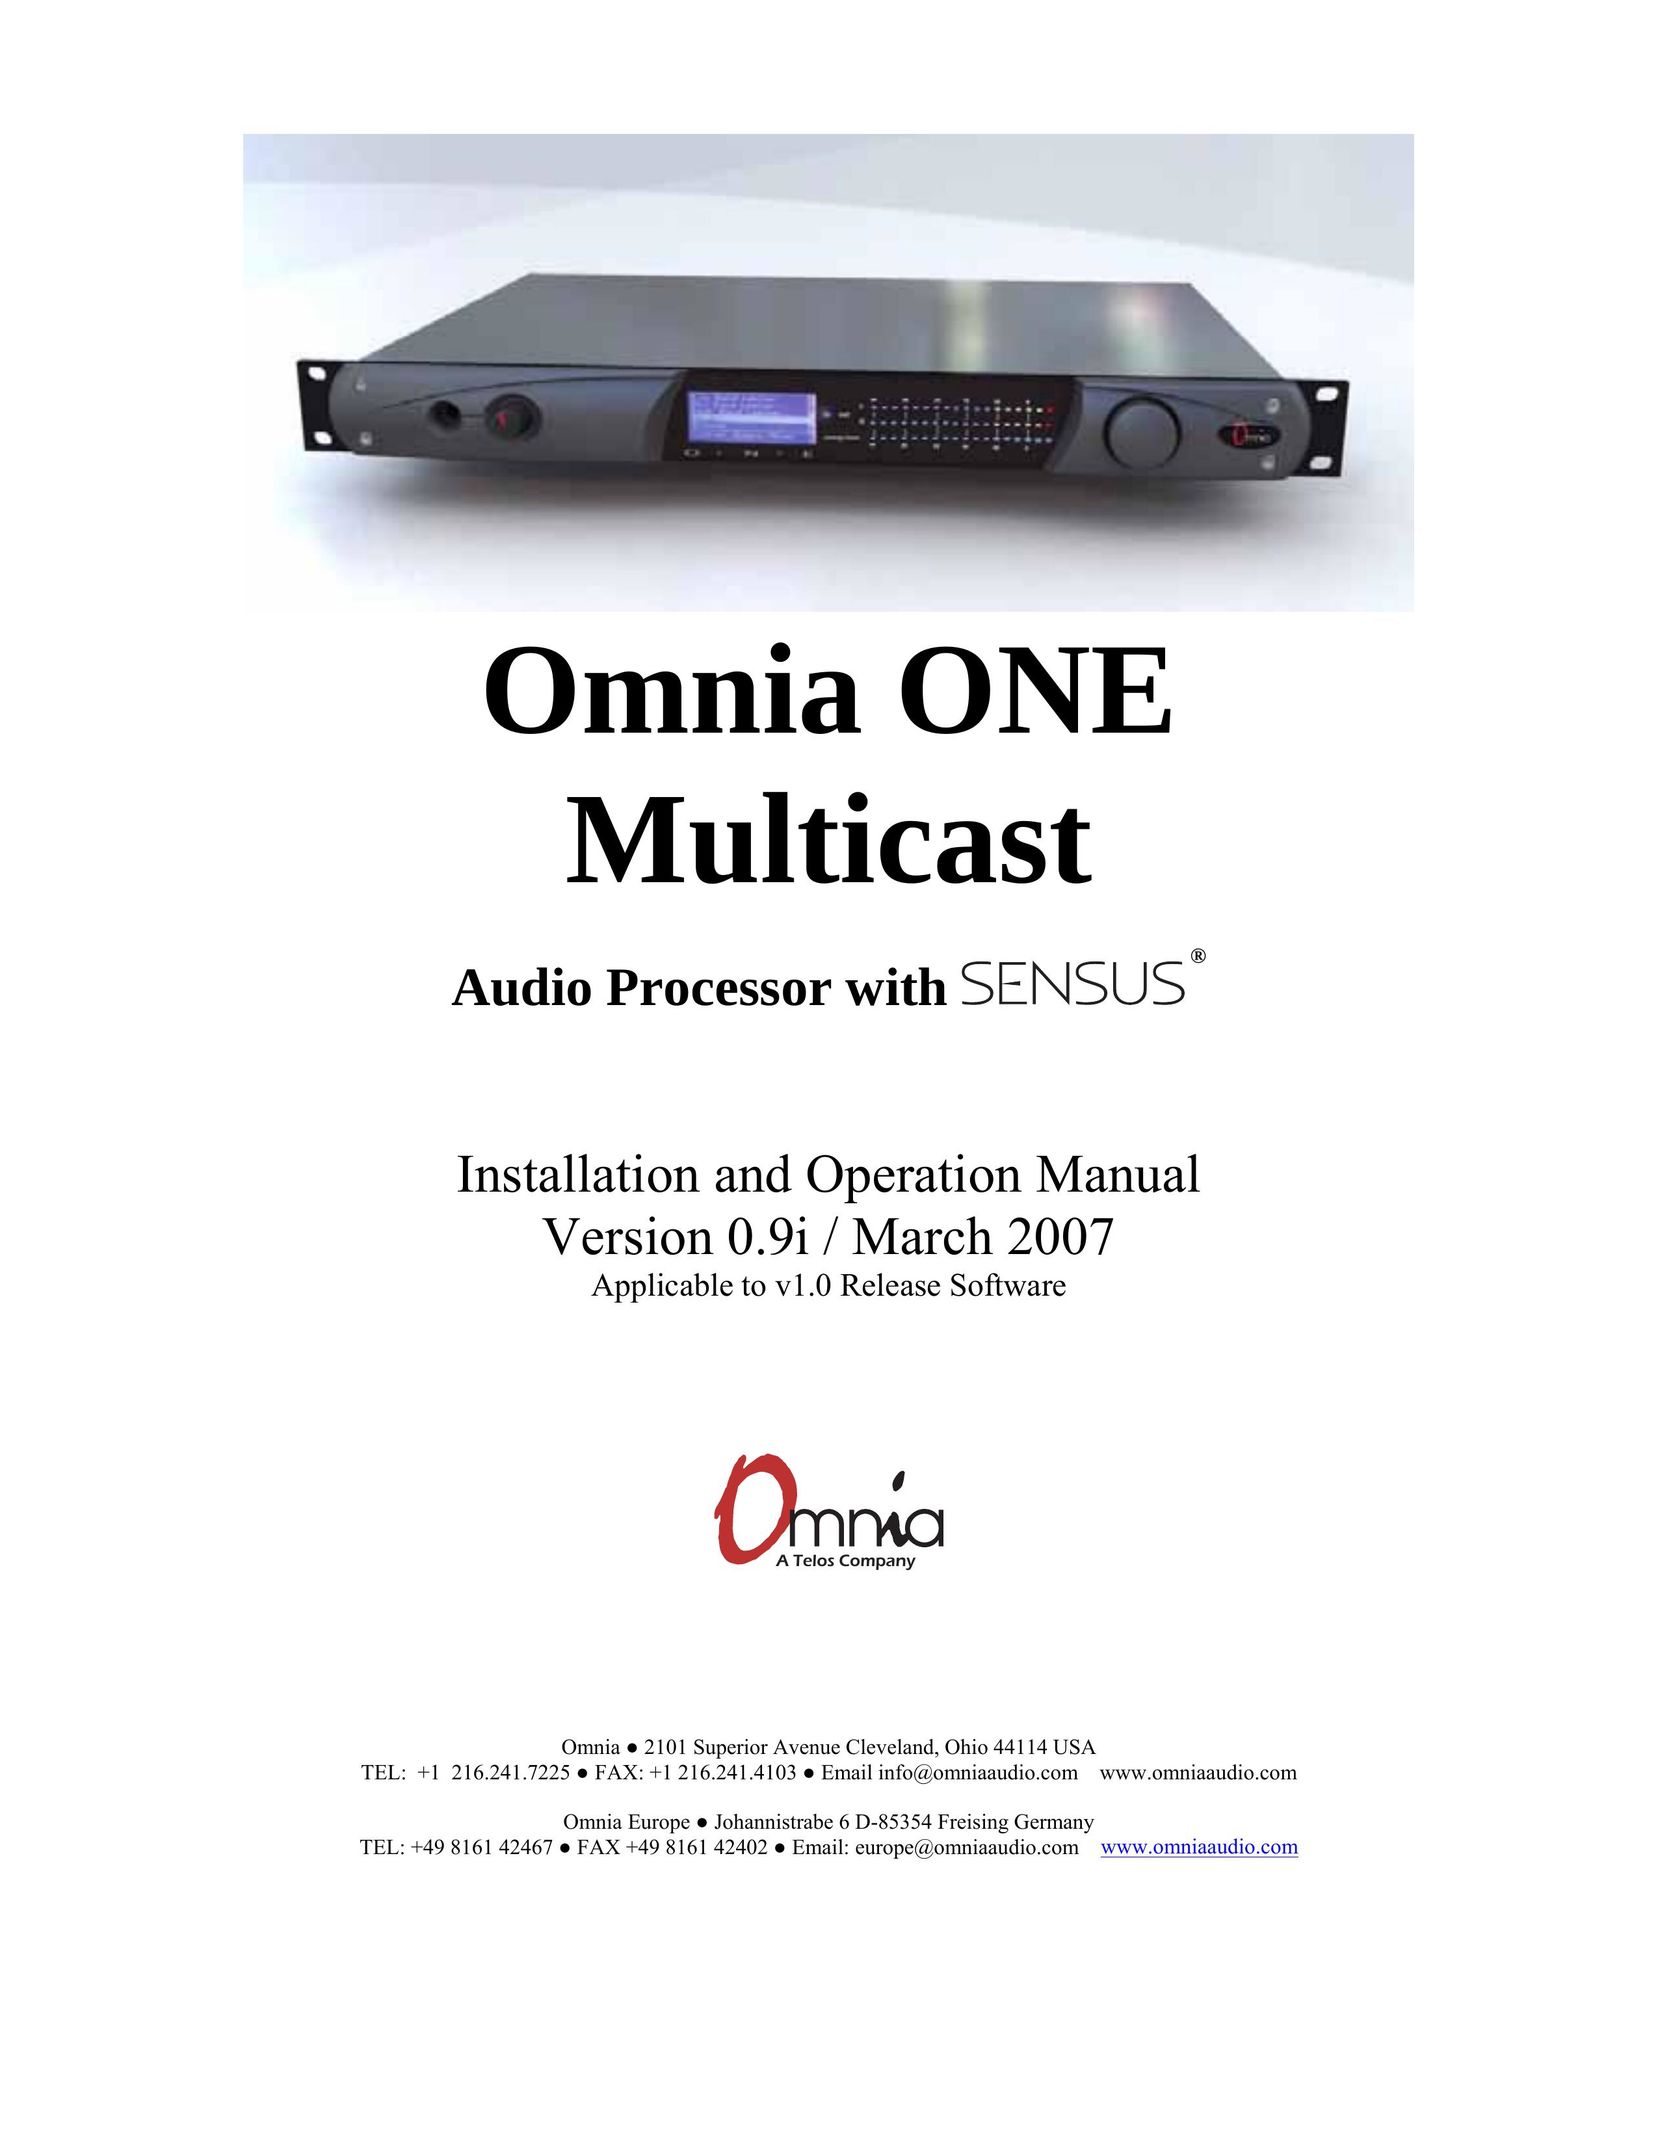 New Media Technology Omnia ONE Multicast Stereo System User Manual